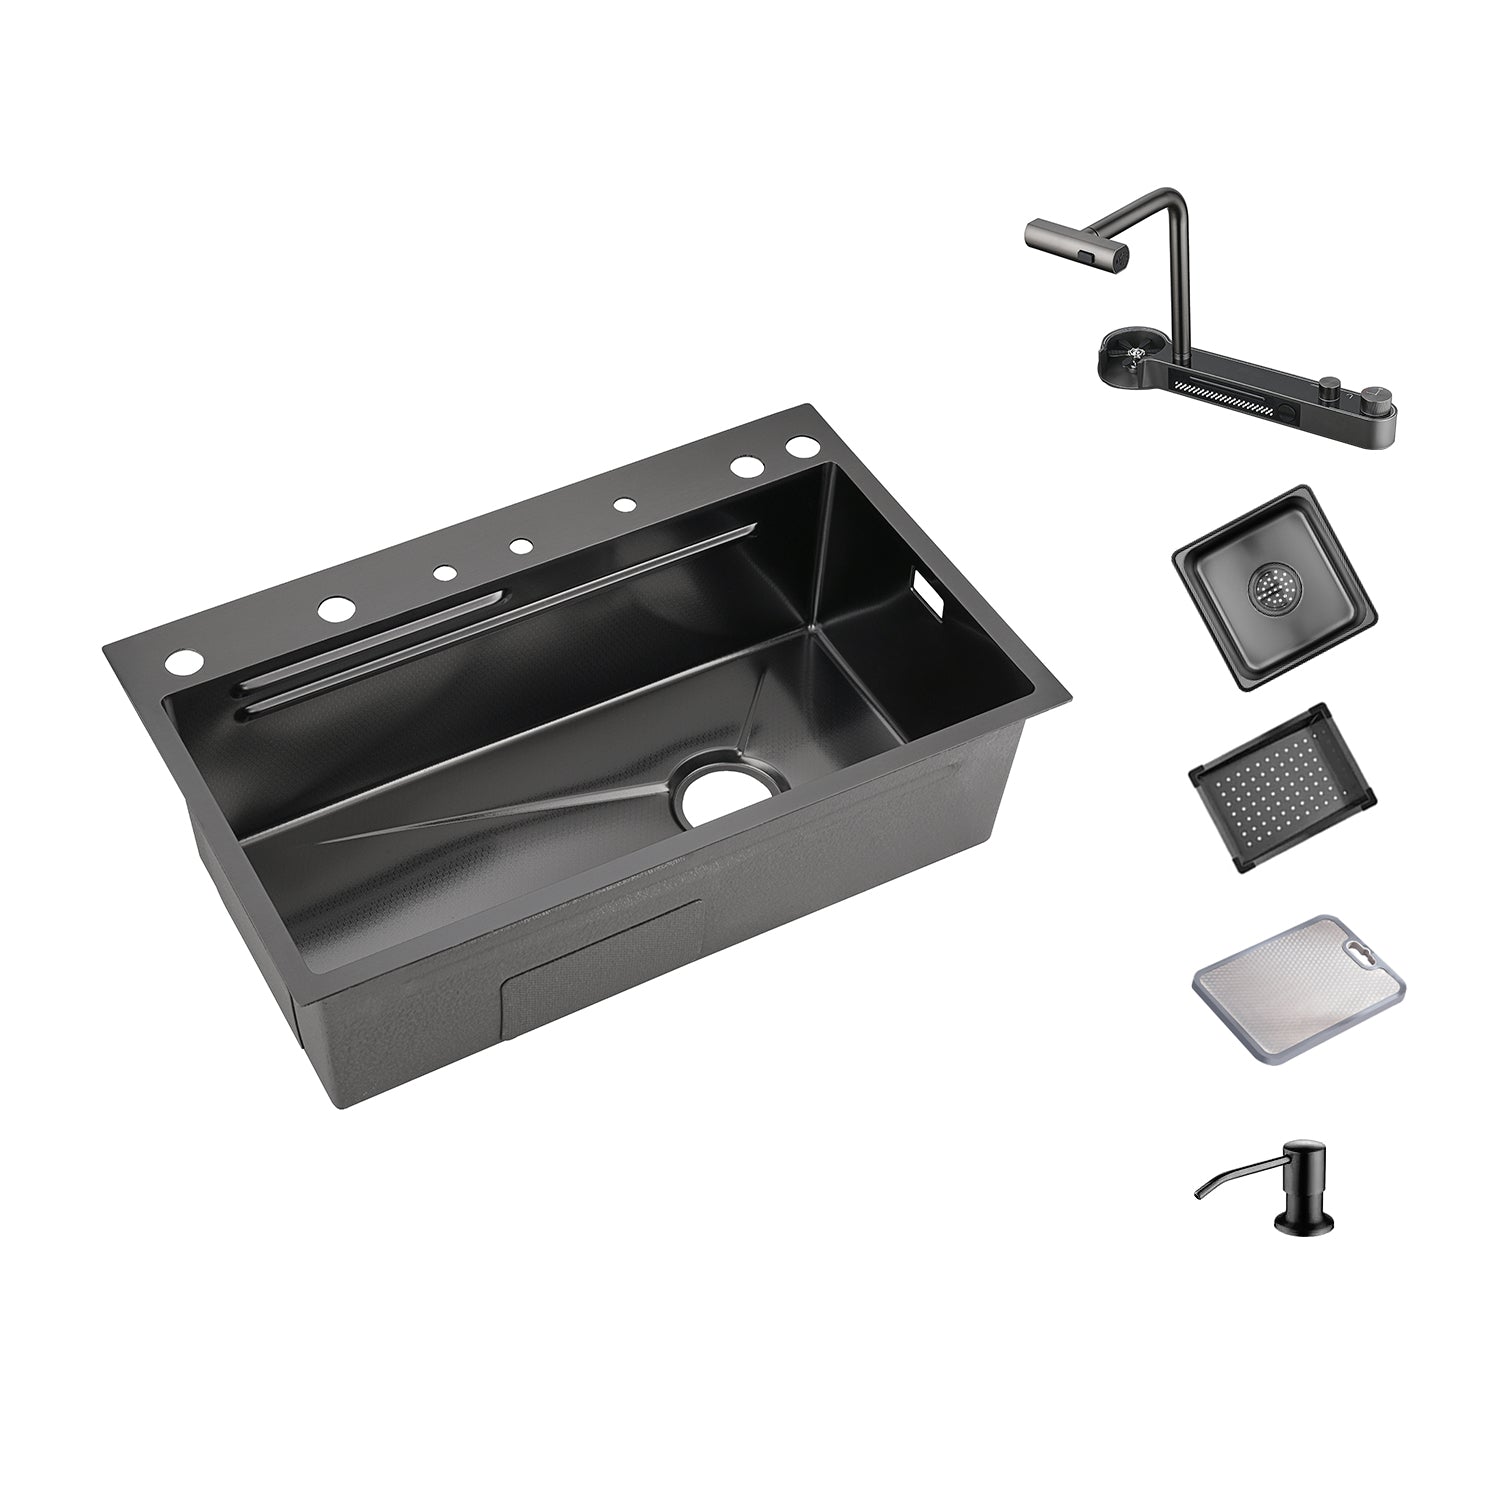 Lefton Two Outlets Waterfall Faucet Kitchen Sink with Digital Temperature Display & LED Lighting-KS2208 -Kitchen Sinks- Lefton Home